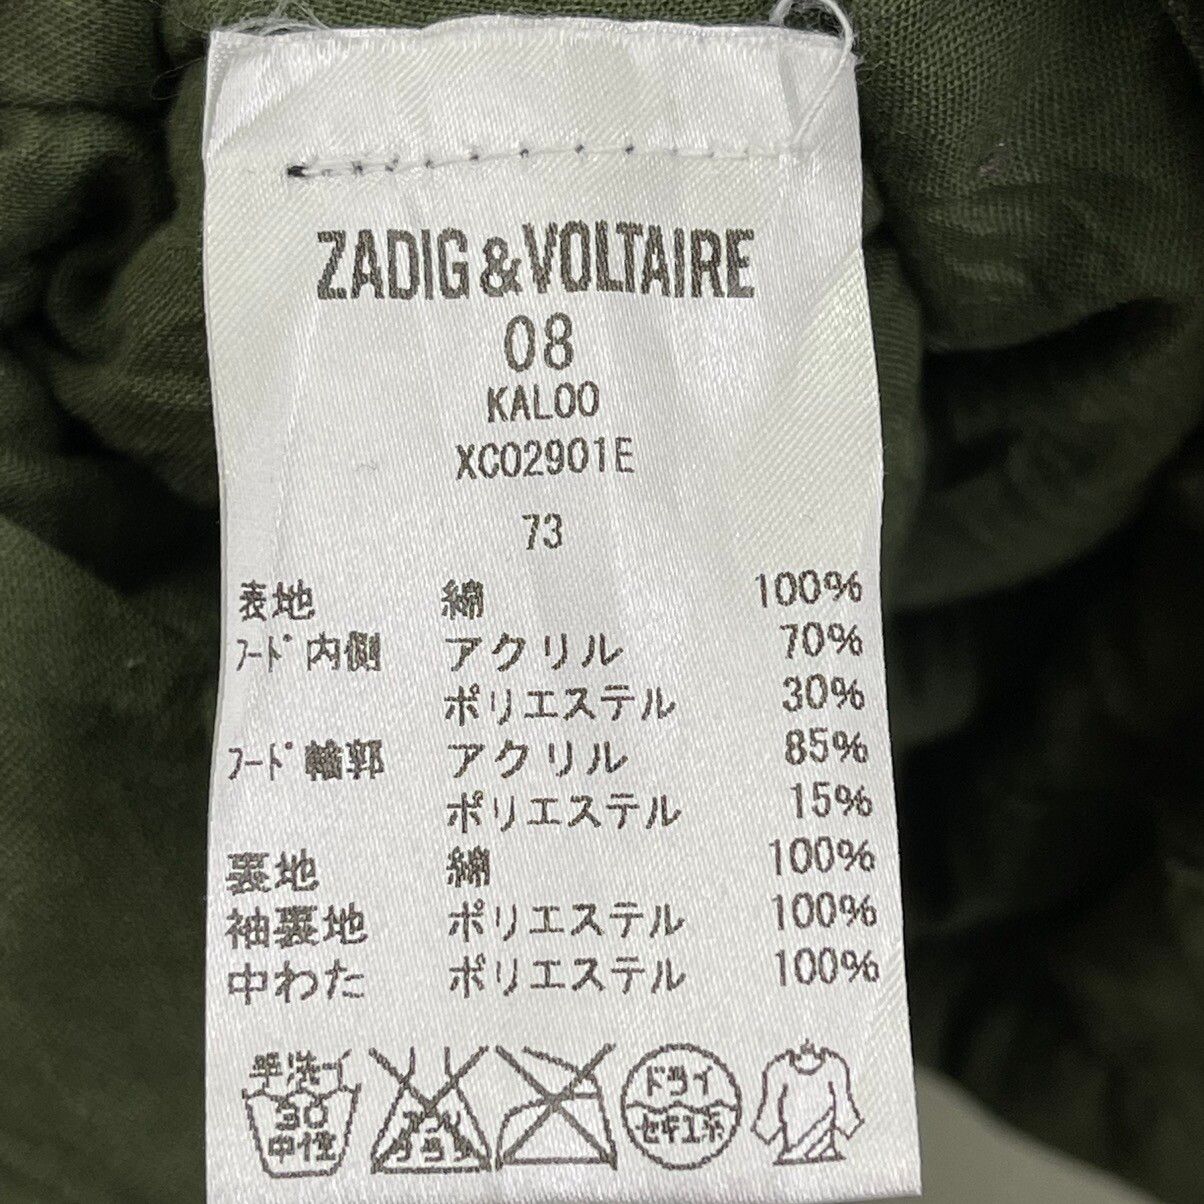 Zadig & Voltaire Military Army Jacket Size S - 8